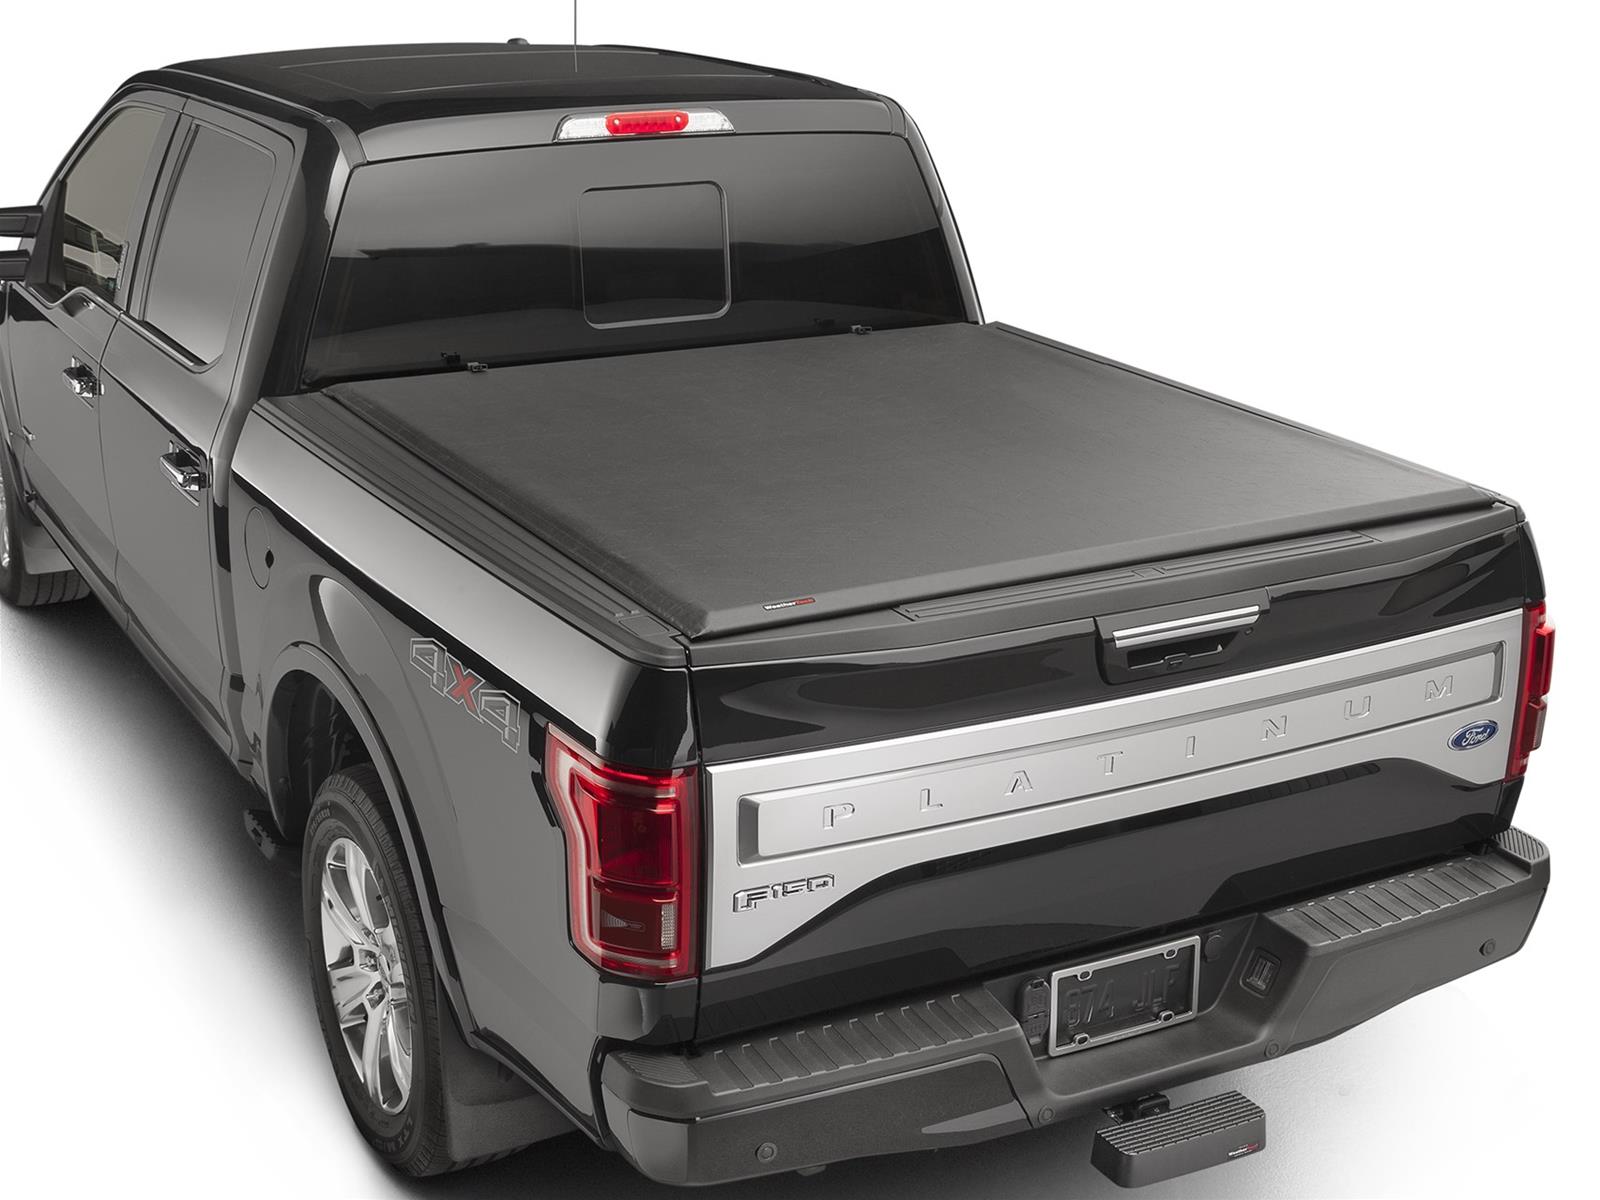 WeatherTech 8RC5118 WeatherTech RollUp Truck Bed Covers Summit Racing